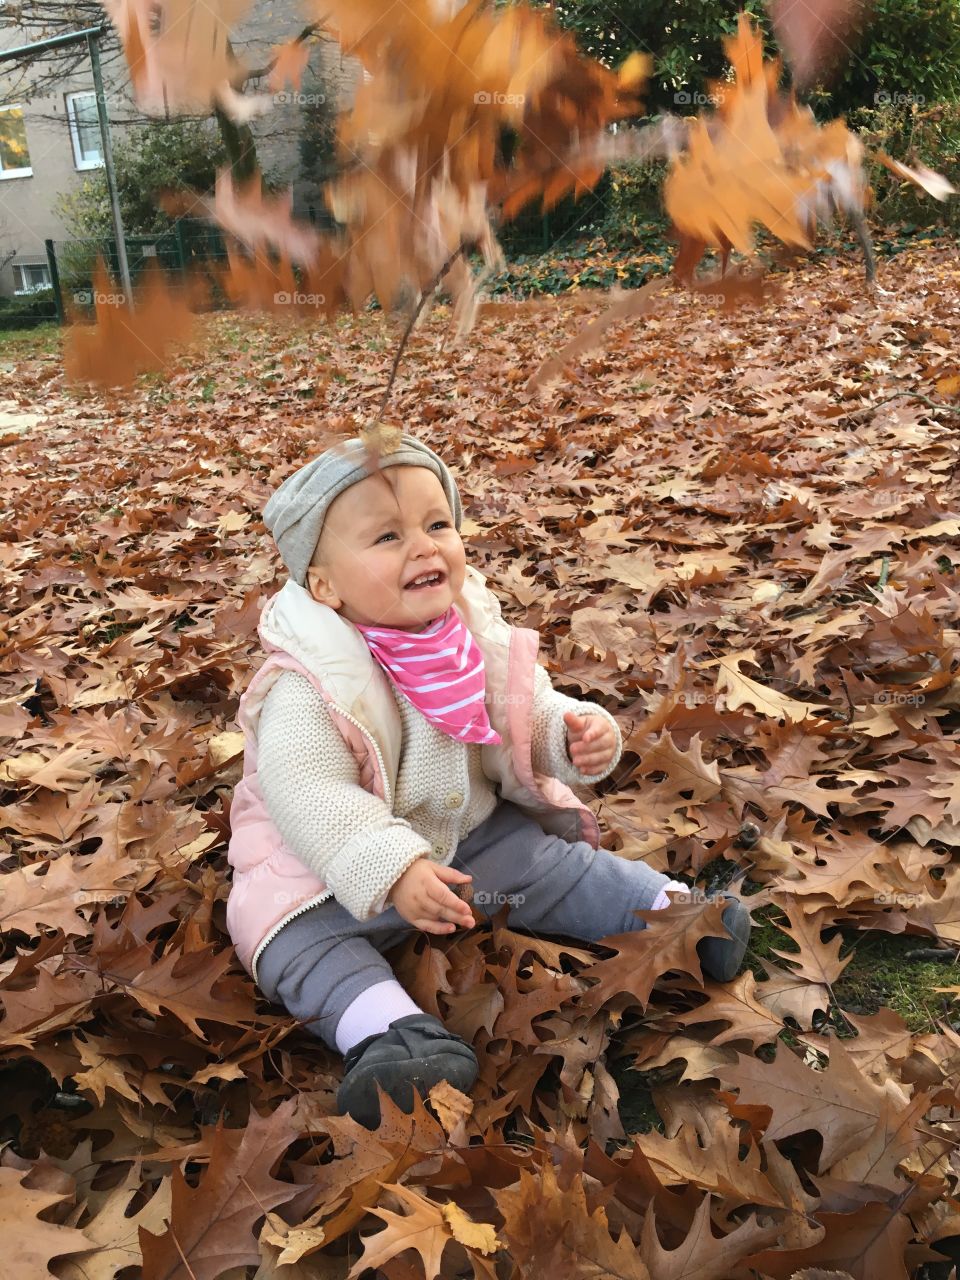 Playing with leaves
